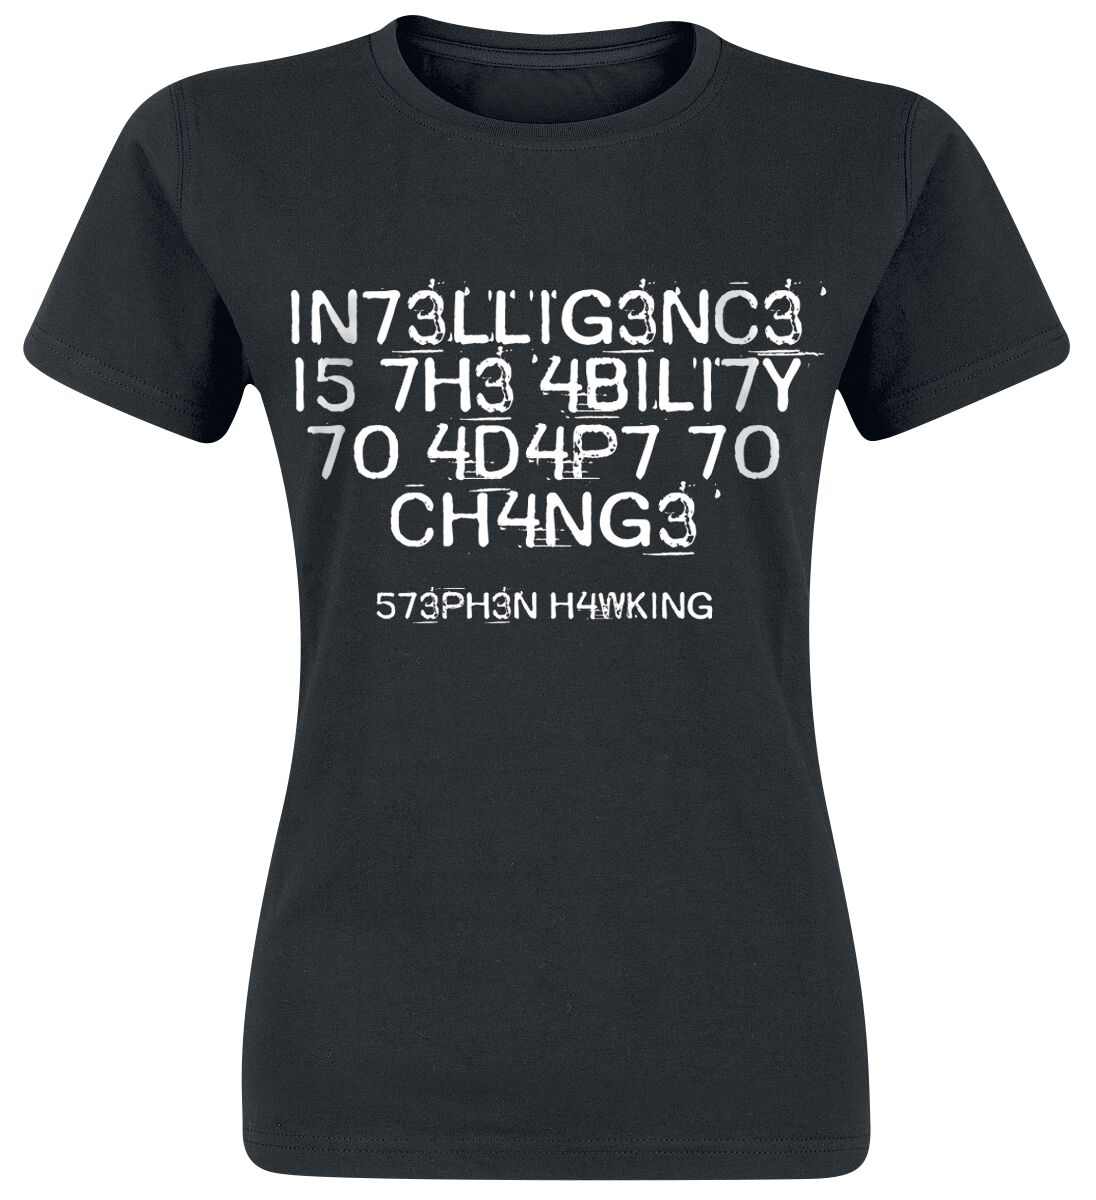 T-Shirt Manches courtes Fun de Slogans - Intelligence Is The Ability To Adapt To Change - S à XXL - 